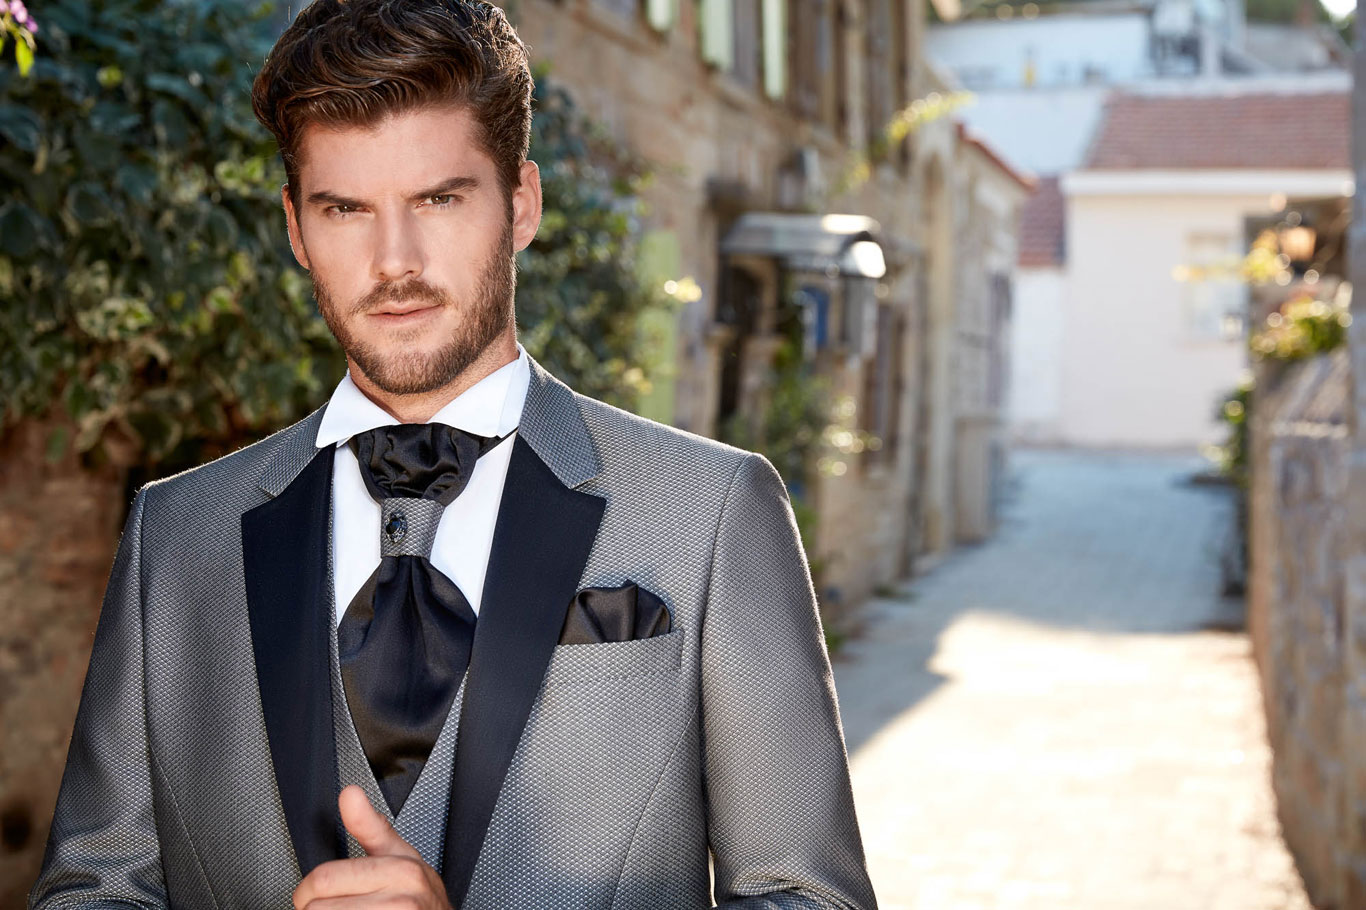 MALE MODELS IN SUITS: Kevin Lütolf for Adimo